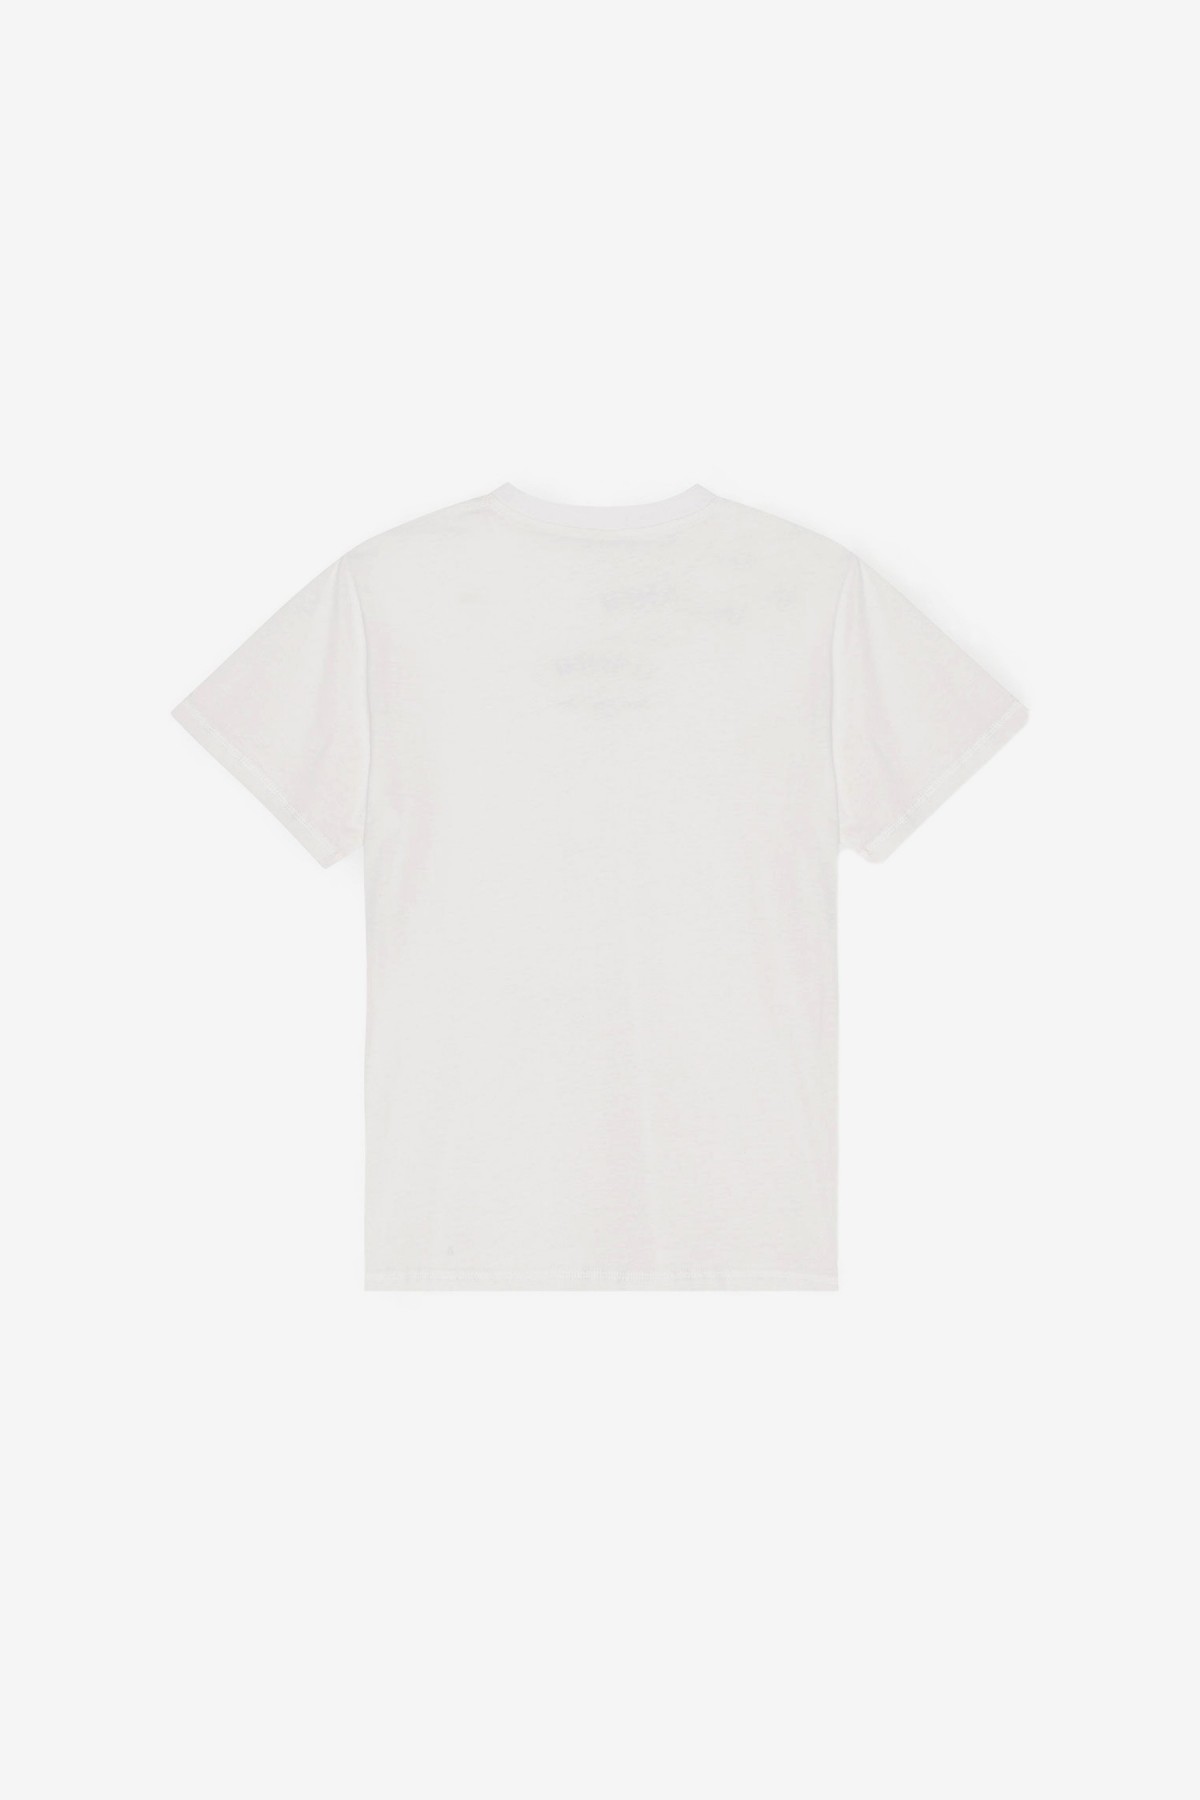 Ganni Thin Jersey Relaxed O-neck T-shirt in Bright White